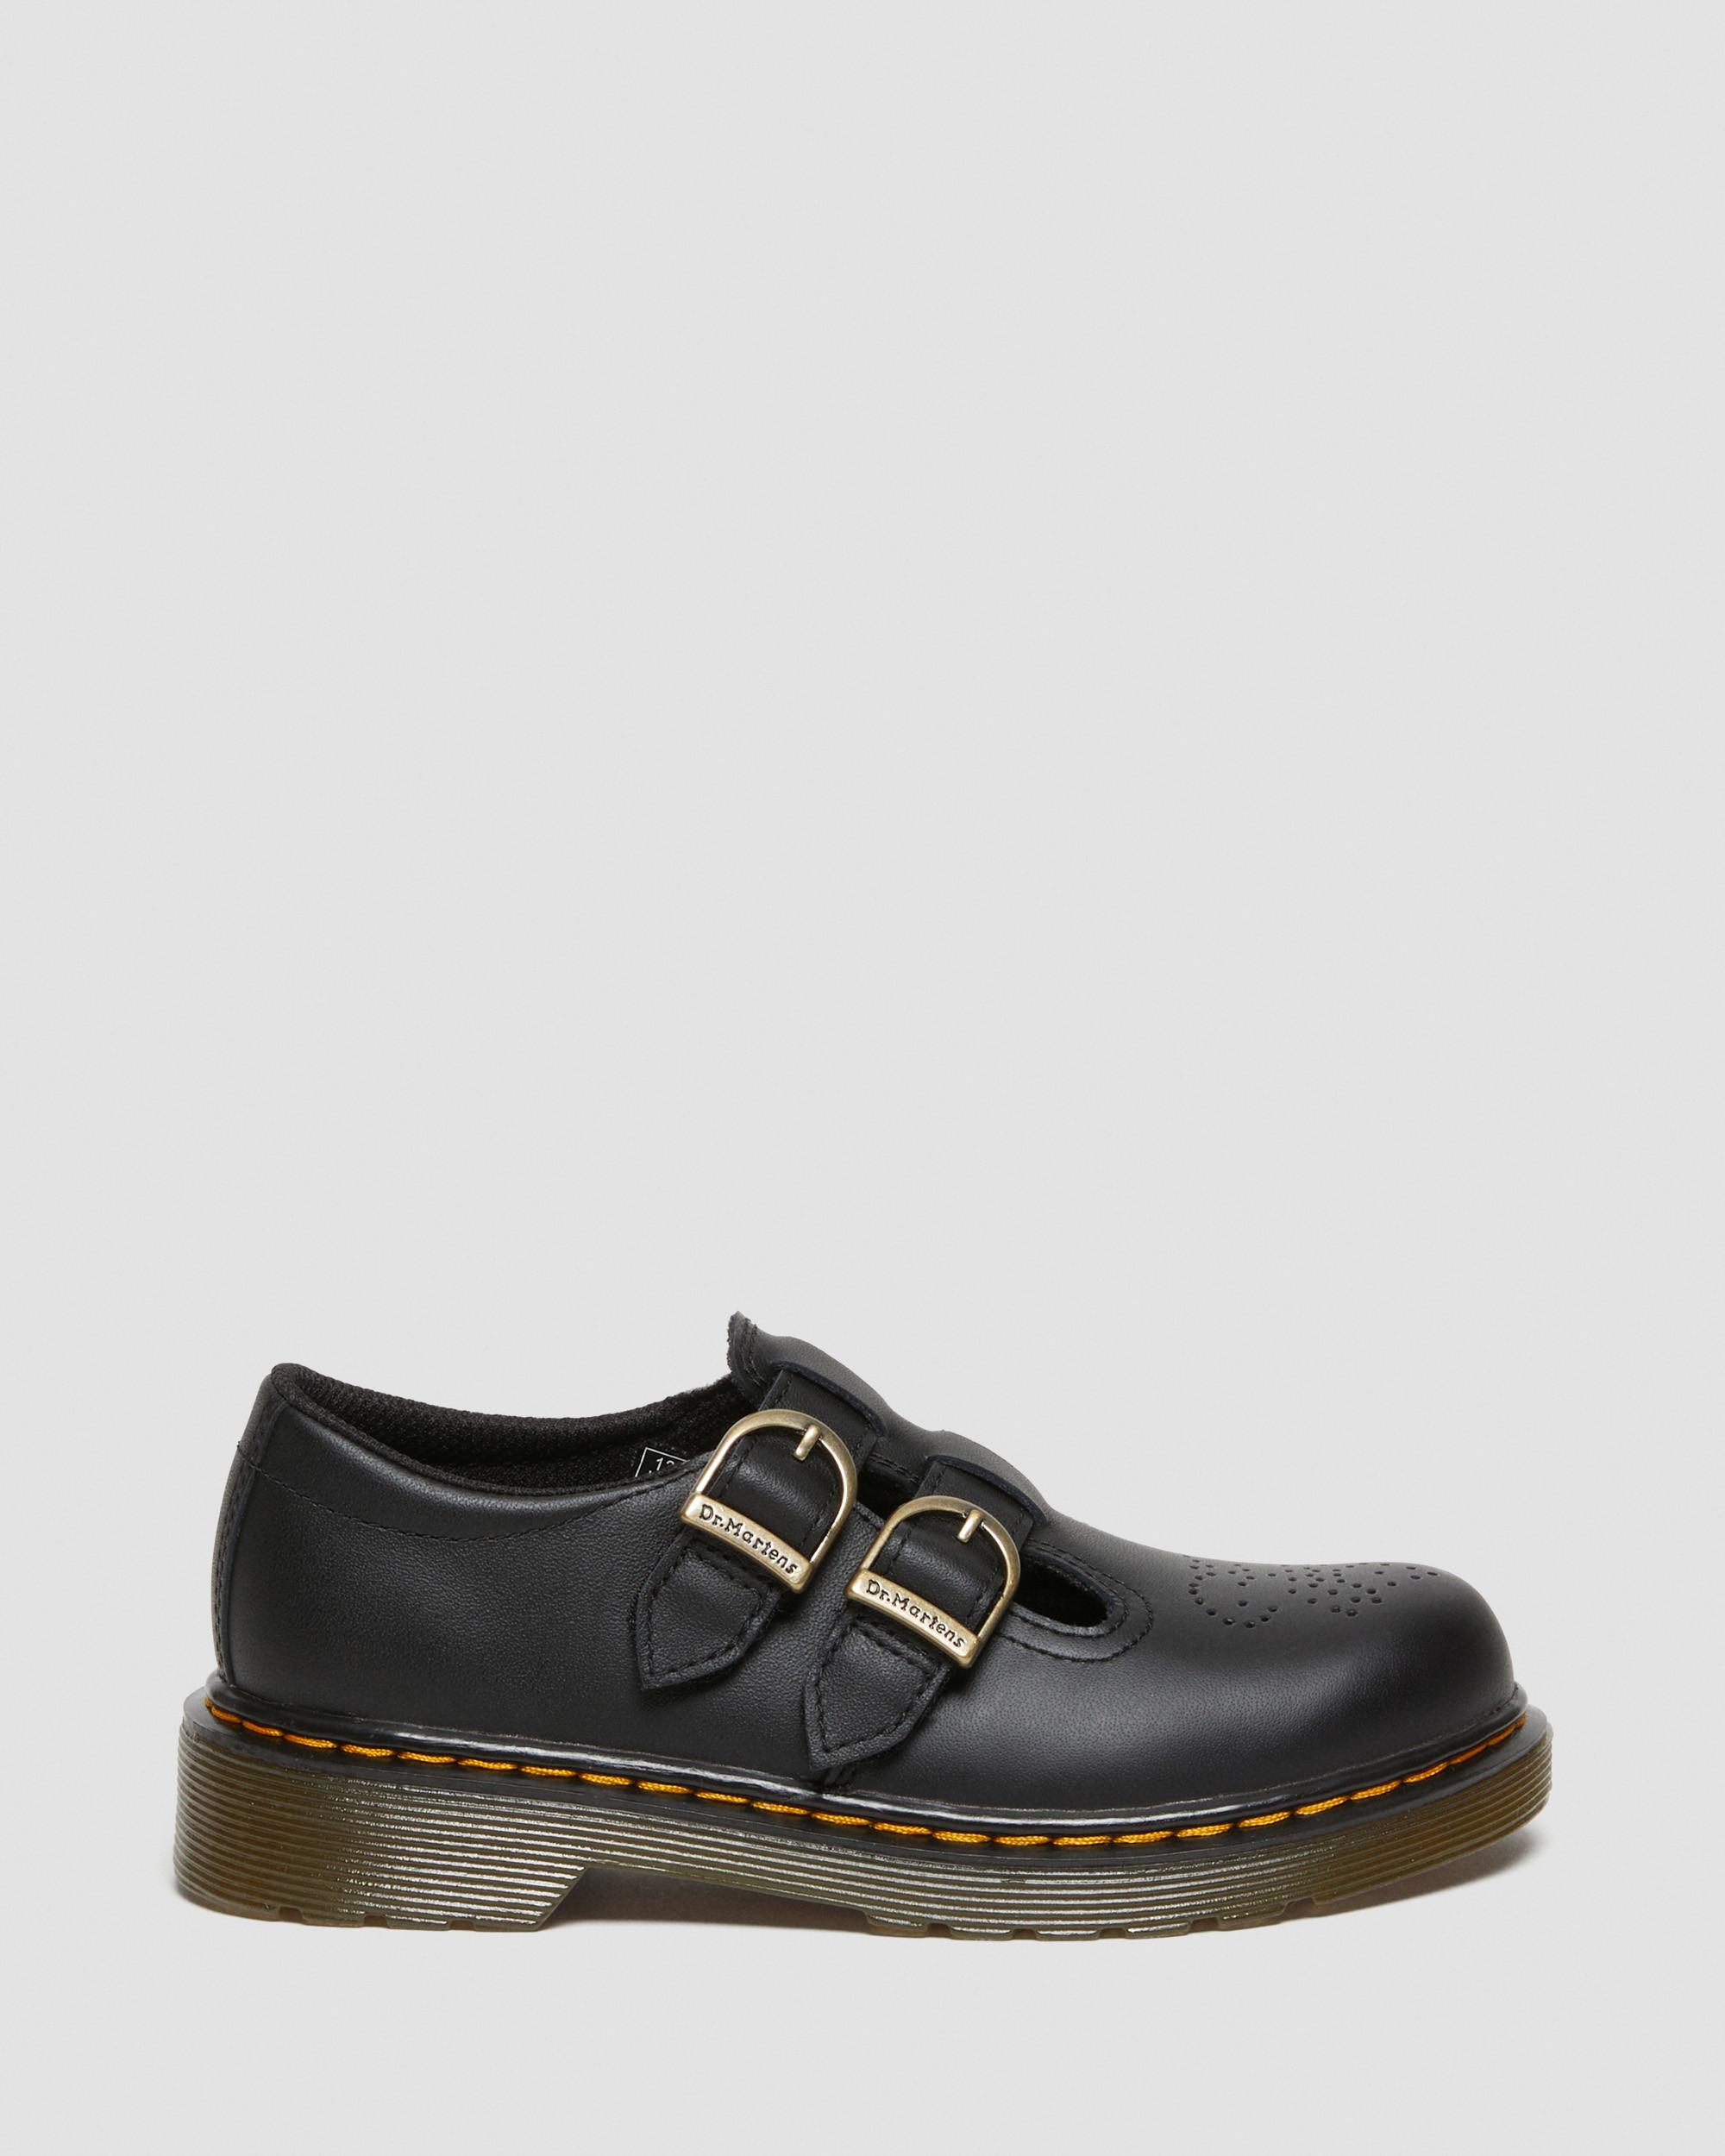 DR MARTENS Junior 8065 Softy T Leather Mary Jane Shoes